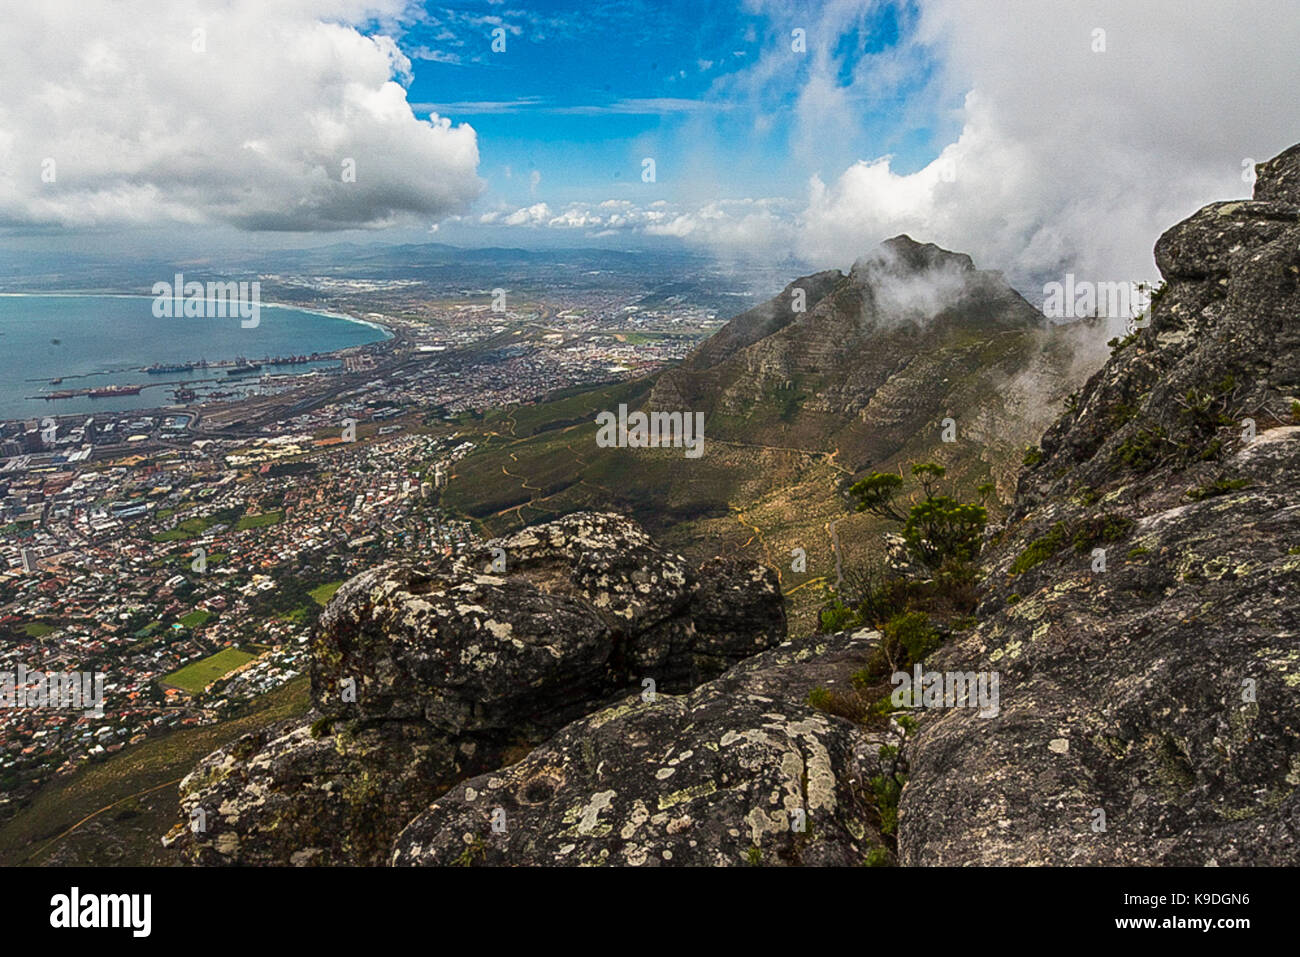 View of Cape Town from Table Mountain, South Africa Stock Photo